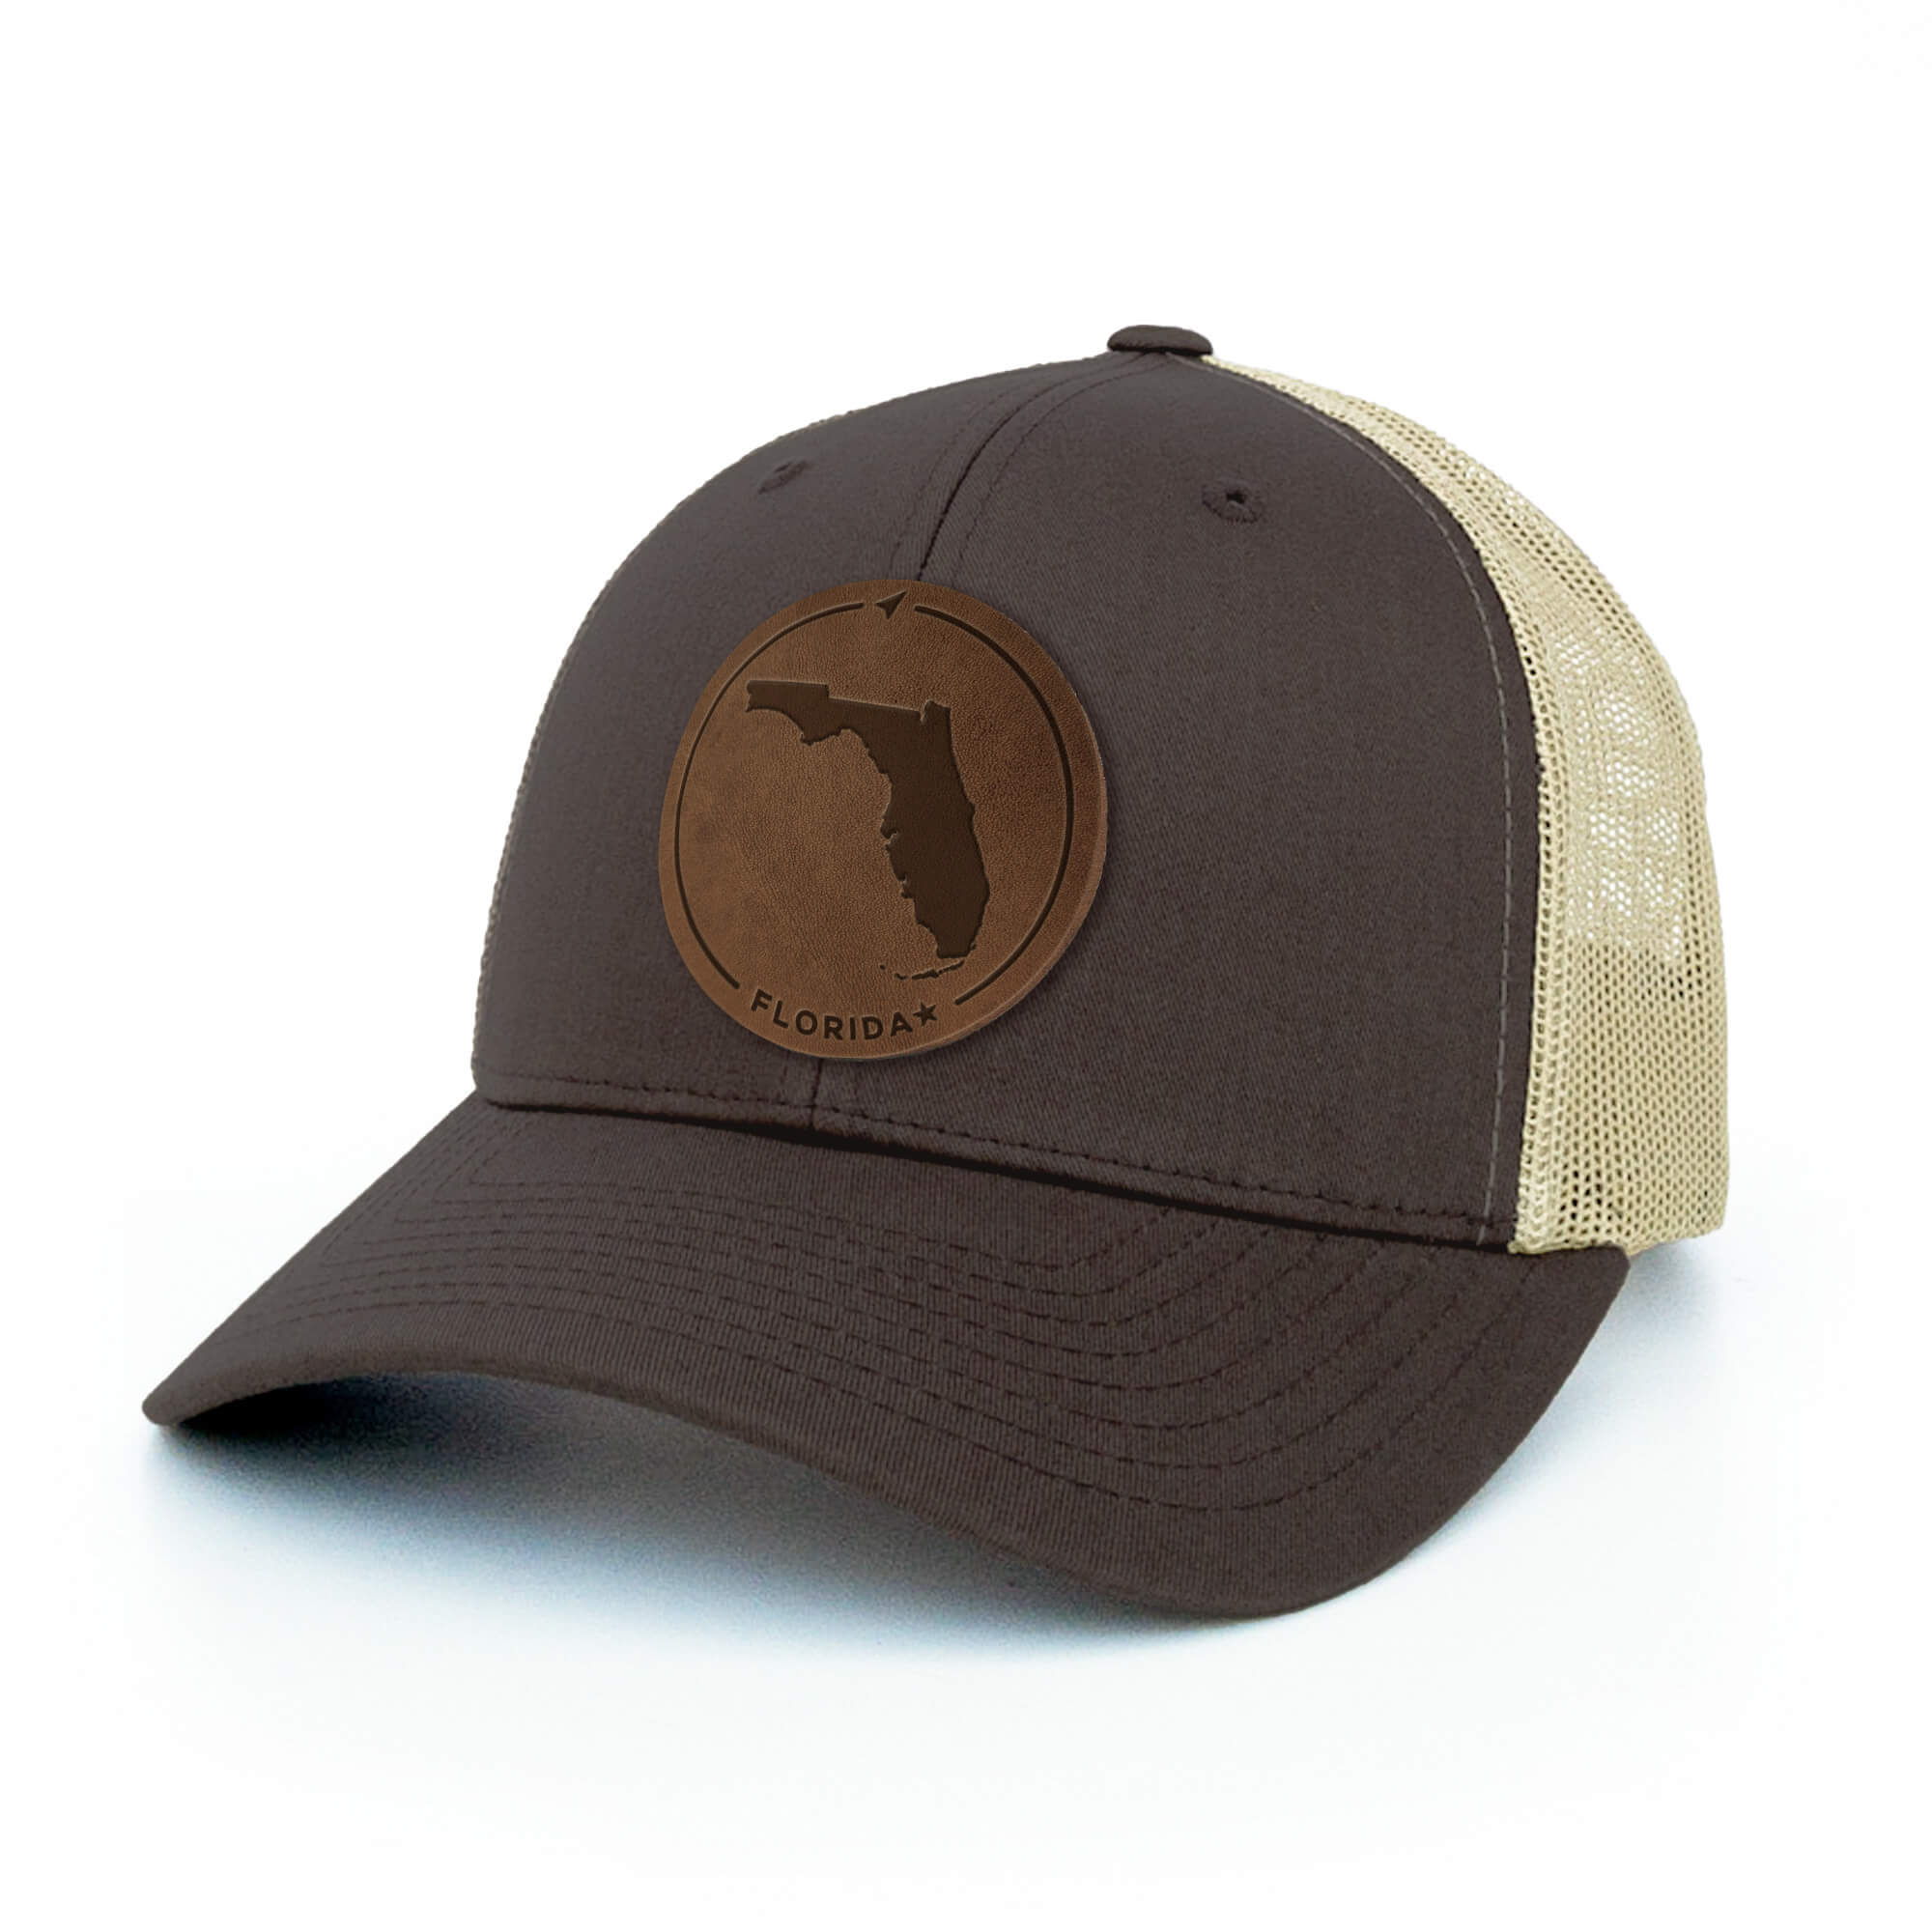 Brown and khaki trucker hat with full-grain leather patch of Florida | BLACK-003-010, CHARC-003-010, NAVY-003-010, HGREY-003-010, MOSS-003-010, BROWN-003-010